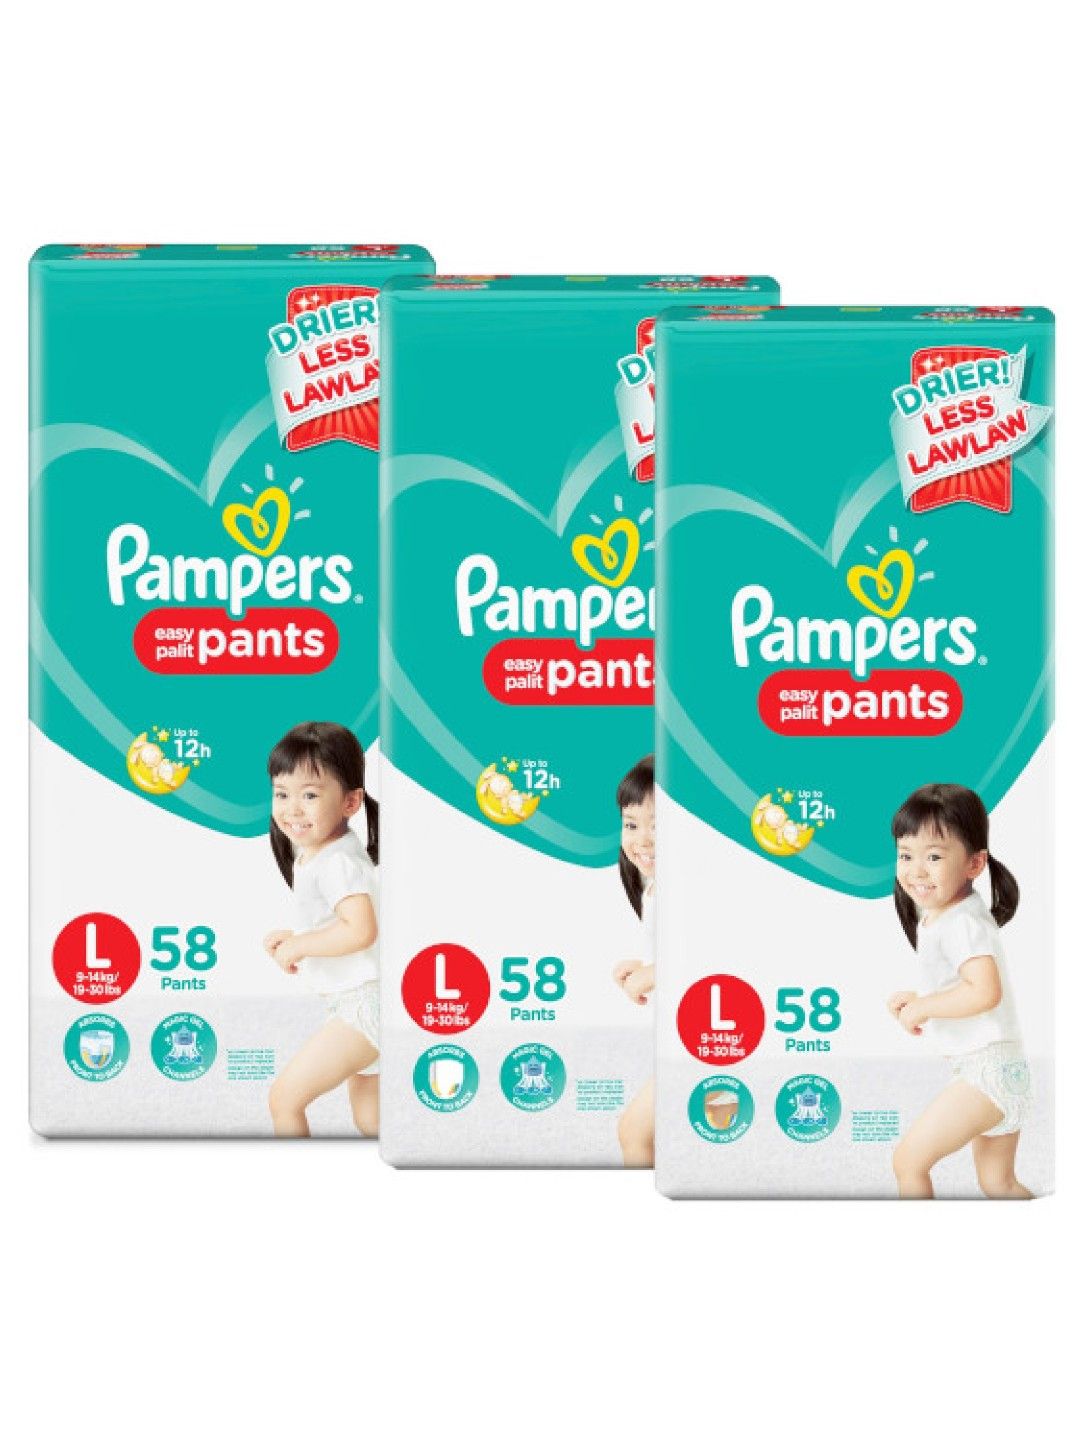 Pampers All Round Protection Pants, Extra Large Size Baby, 43% OFF